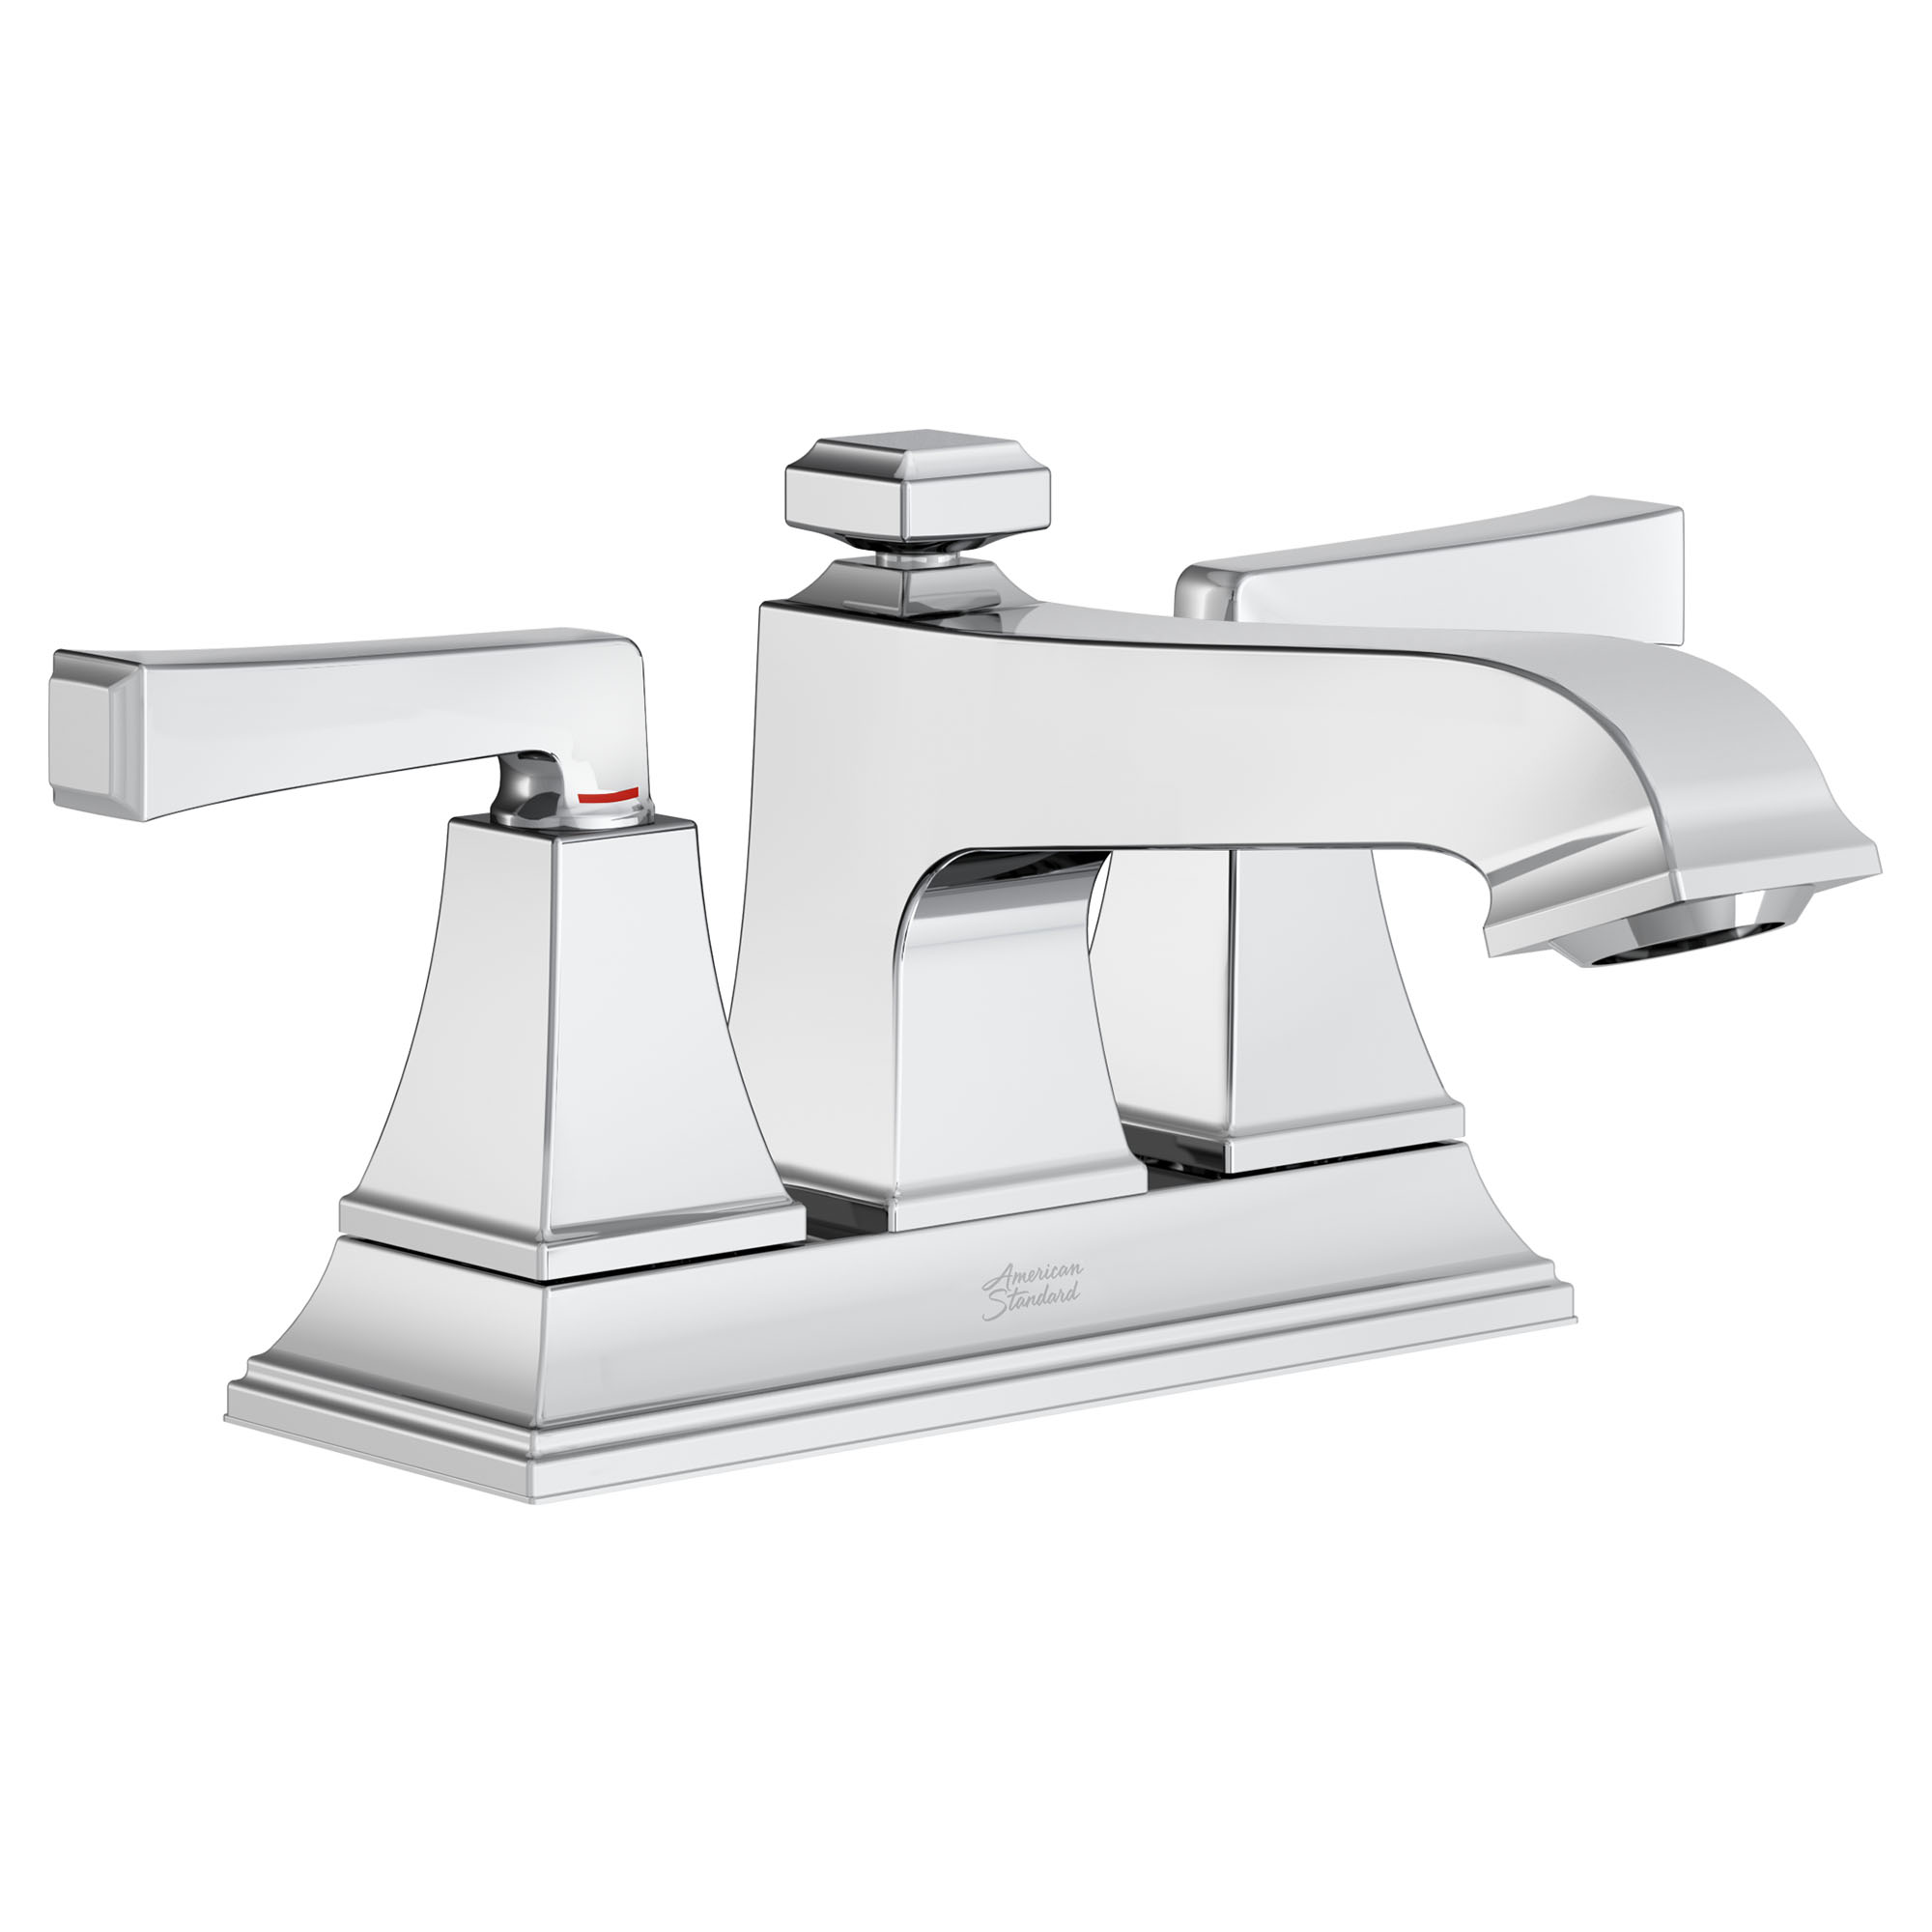 Town Square® S 4-Inch Centerset 2-Handle Bathroom Faucet 1.2 gpm/4.5 L/min With Lever Handles